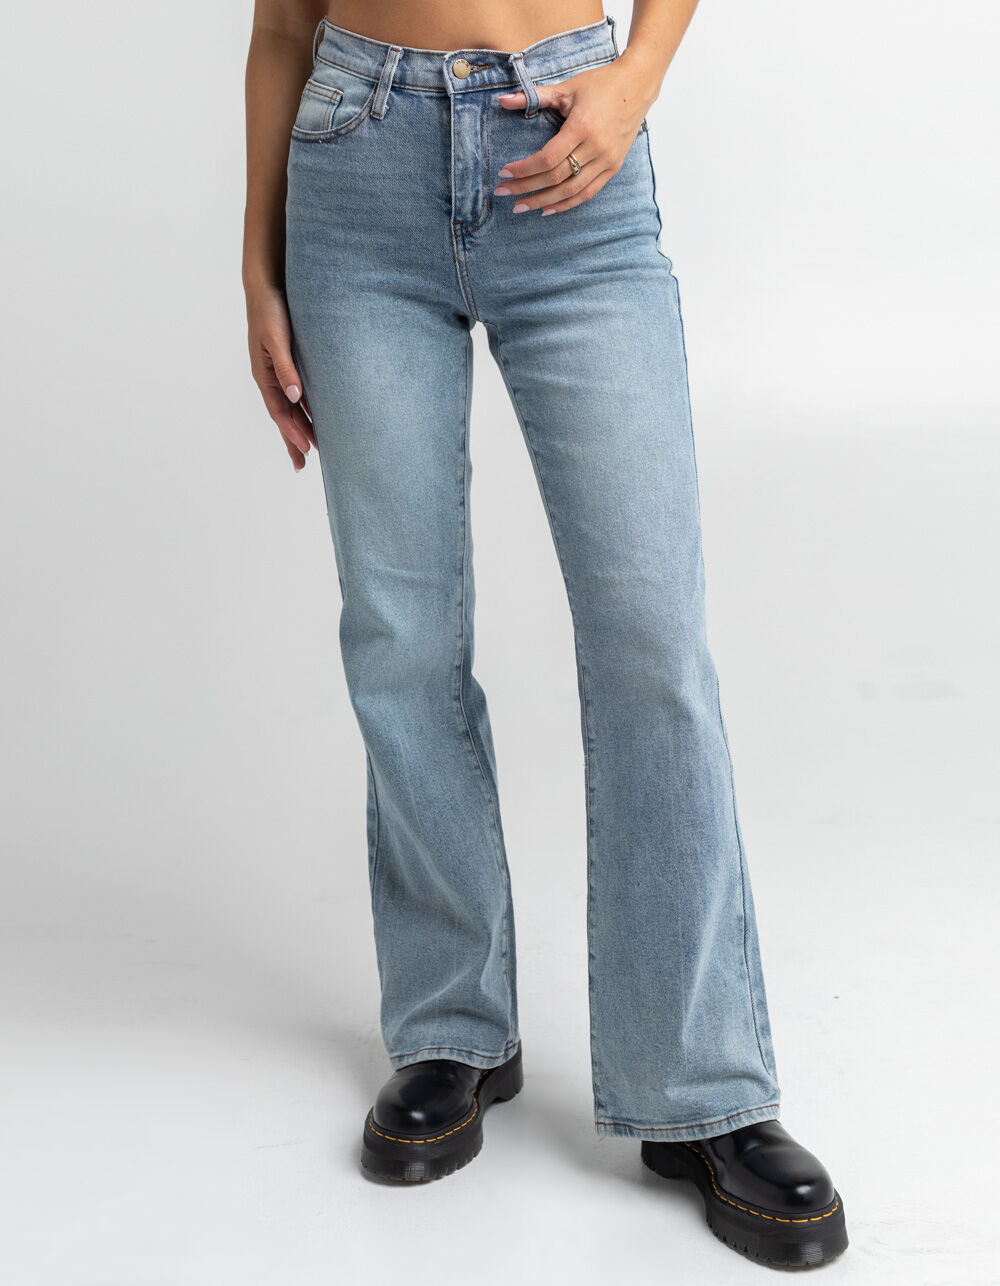 RSQ Flare Womens Jeans - LIGHT WASH